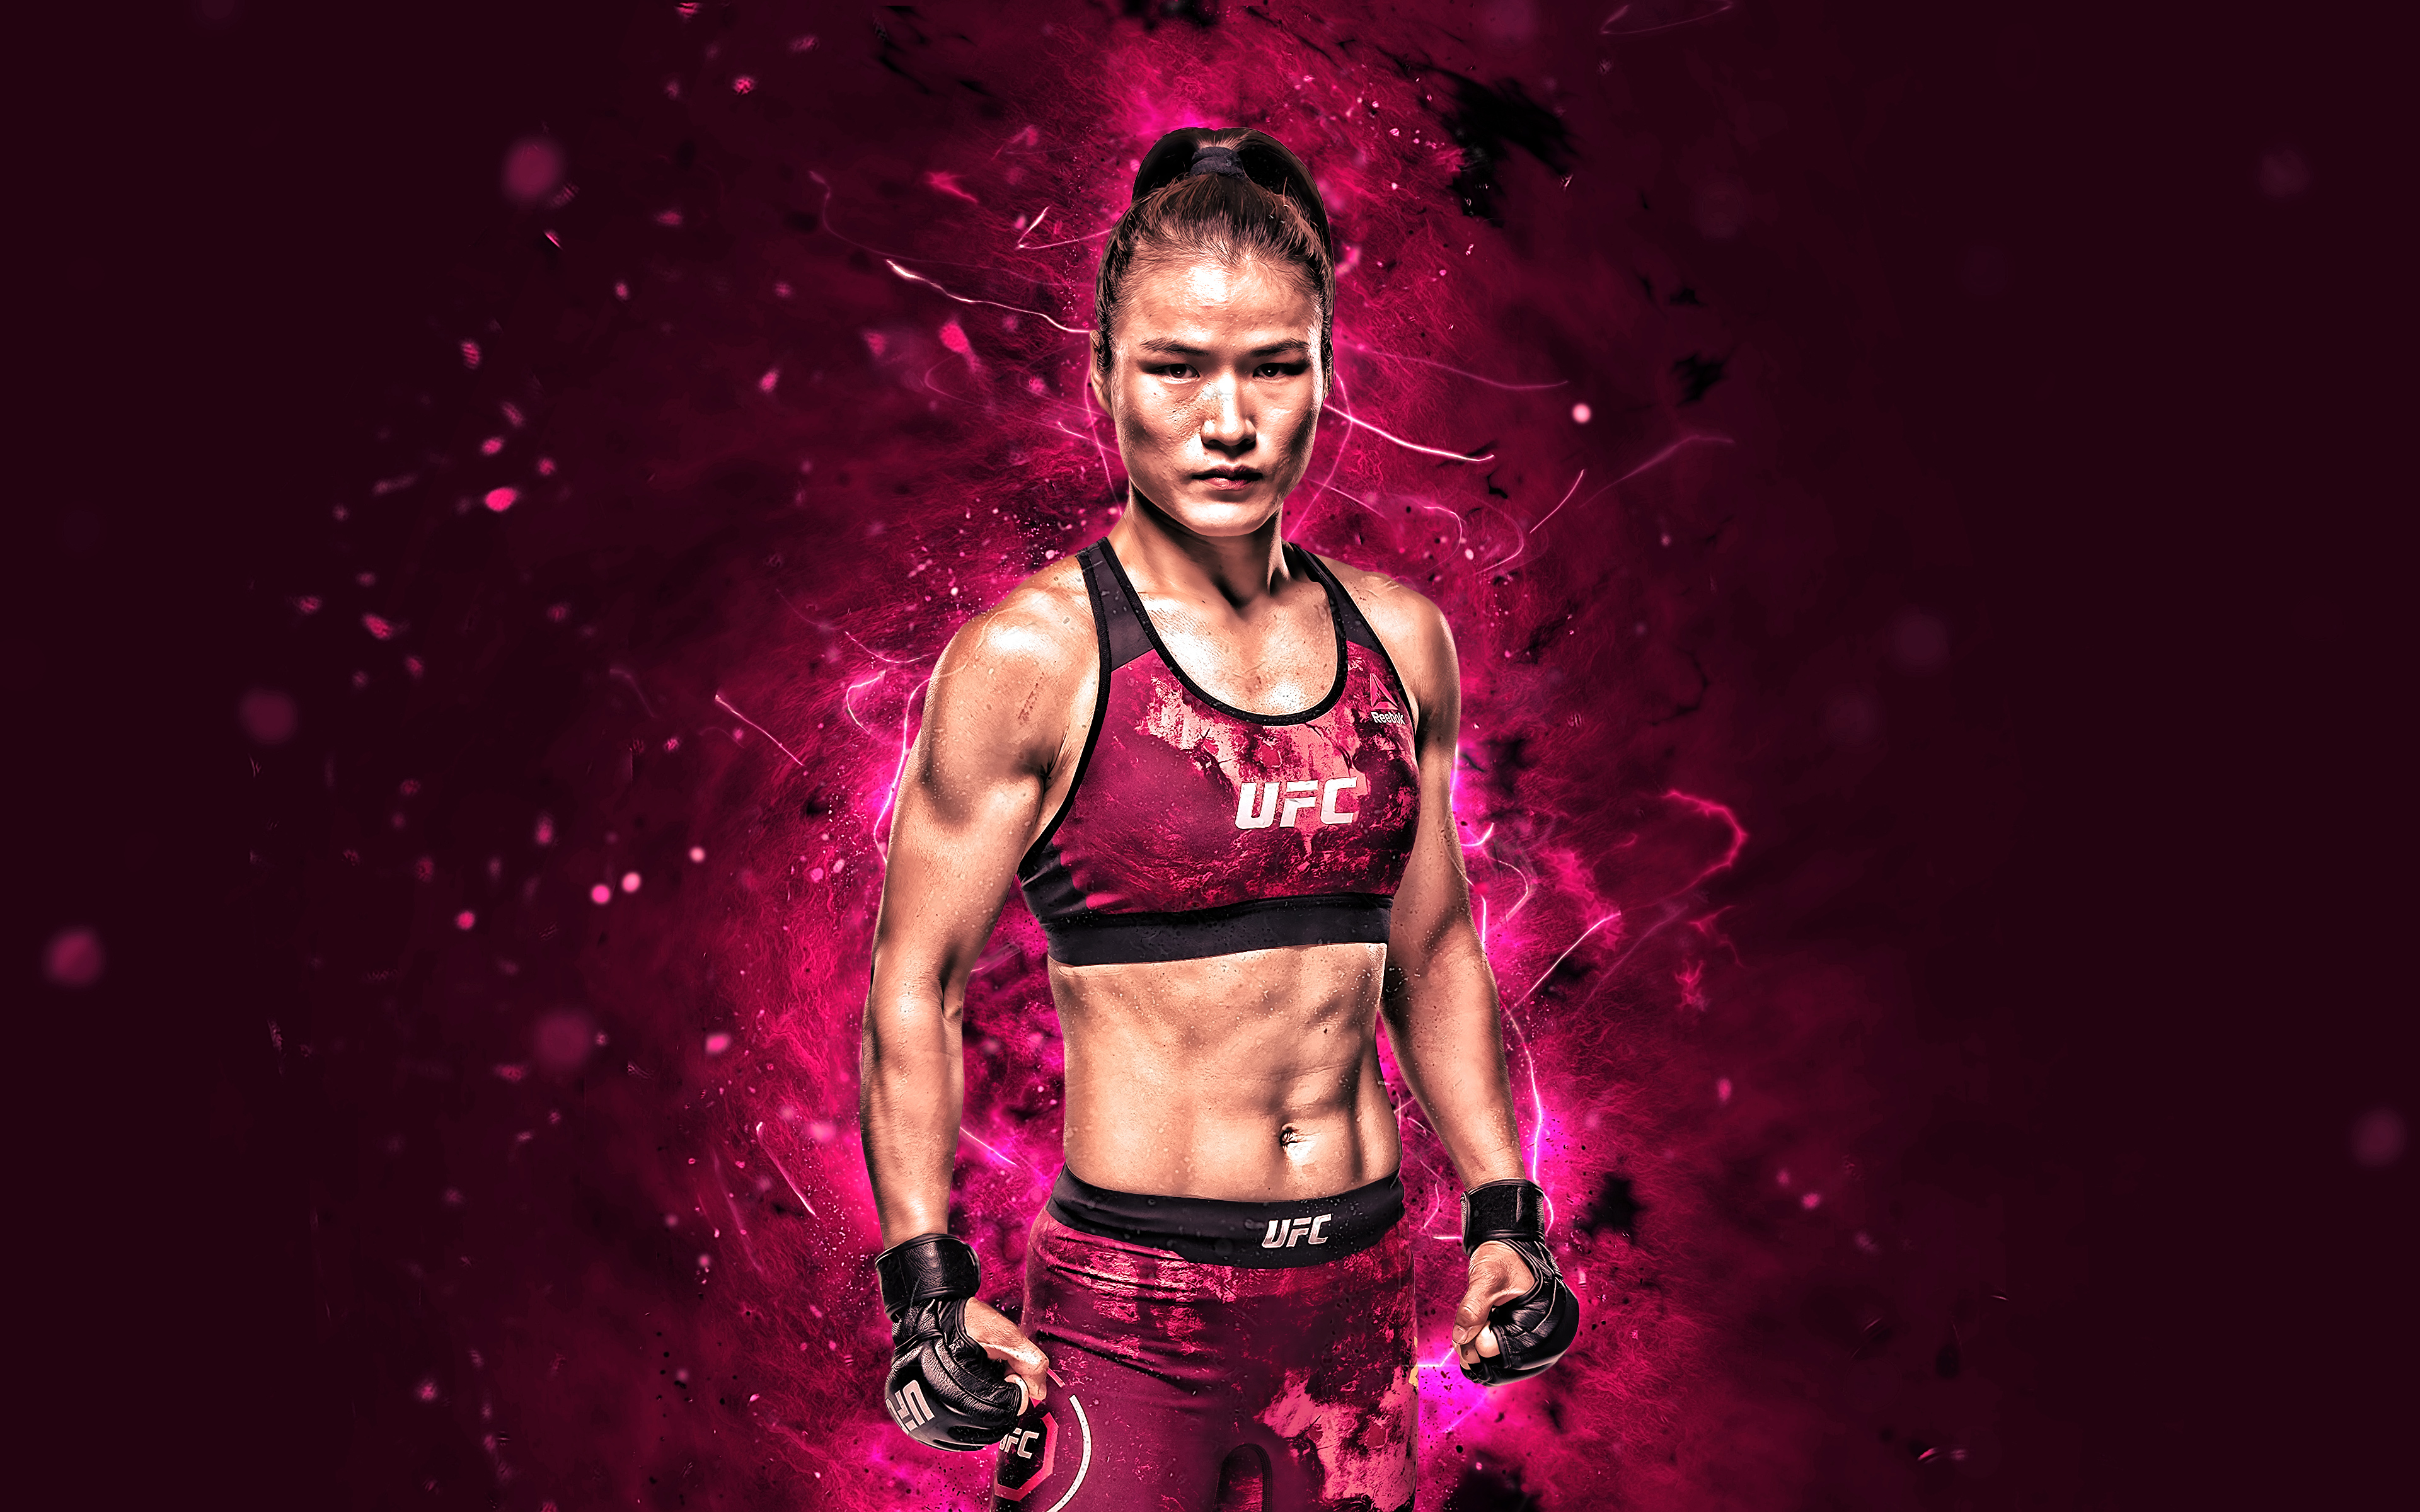 Download wallpaper Weili Zhang, 4k, purple neon lights, Chinese fighters, MMA, UFC, female fighters, Mixed martial arts, Weili Zhang 4K, UFC fighters, Magnum, MMA fighters for desktop with resolution 3840x2400. High Quality